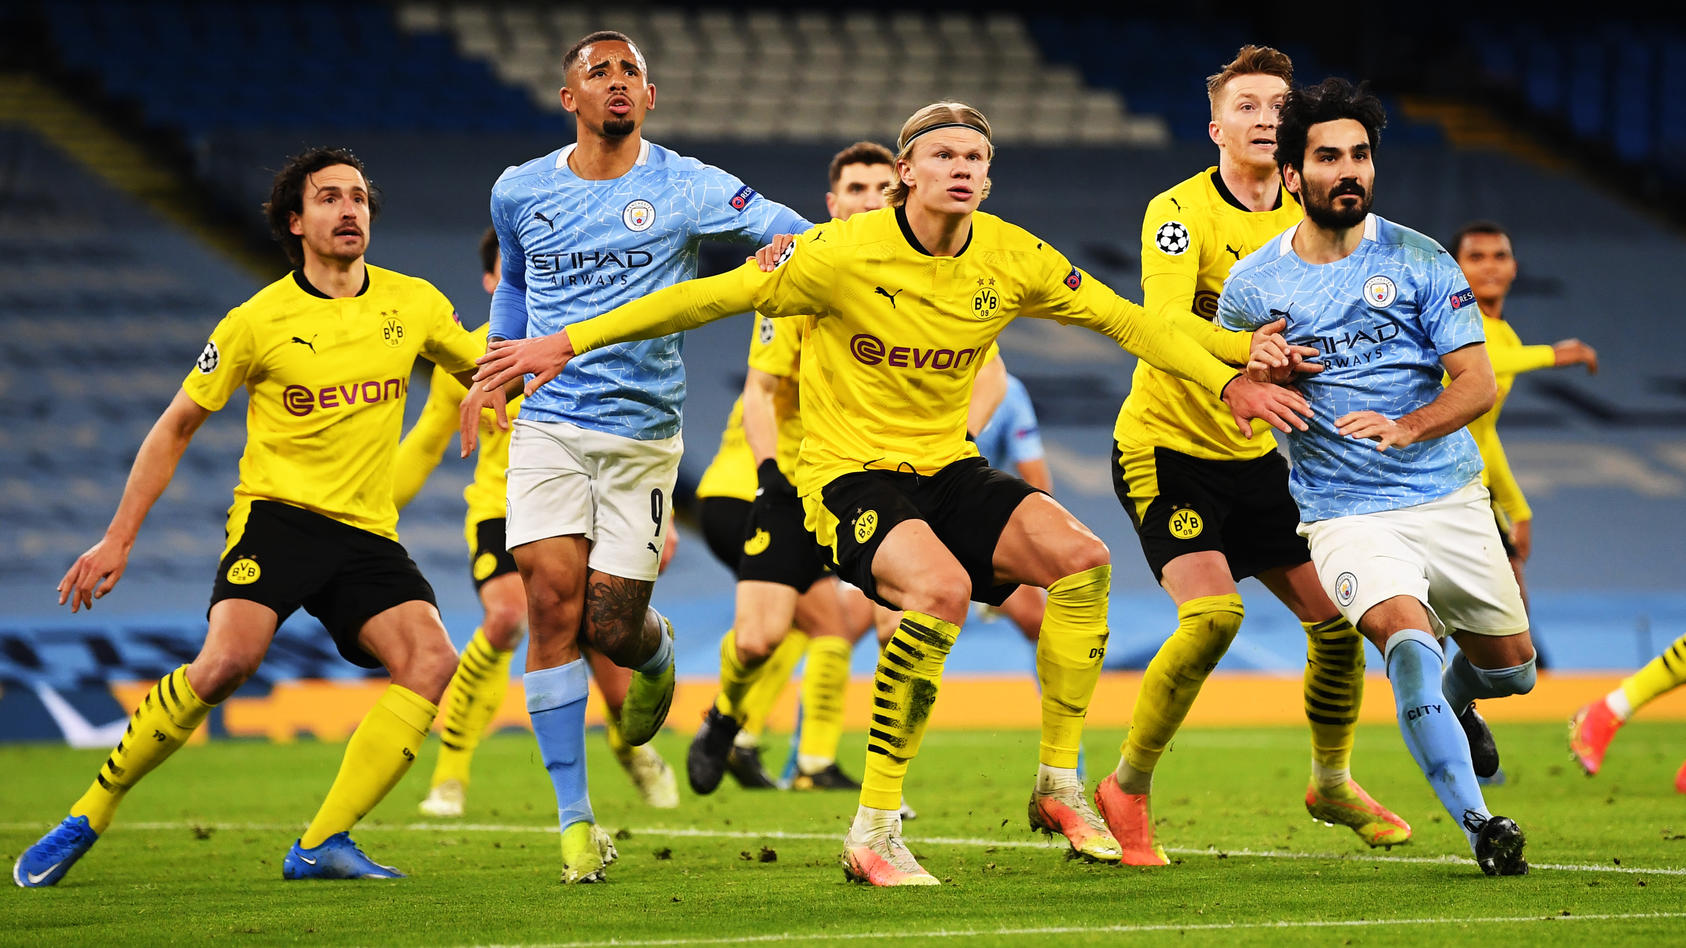 MANCHESTER, ENGLAND - APRIL 06: Erling Haaland of Borussia Dortmund battles with Gabriel Jesus (L) and Ilkay Guendogan (R) of Manchester City as they wait for the ball during the UEFA Champions League Quarter Final match between Manchester City and B